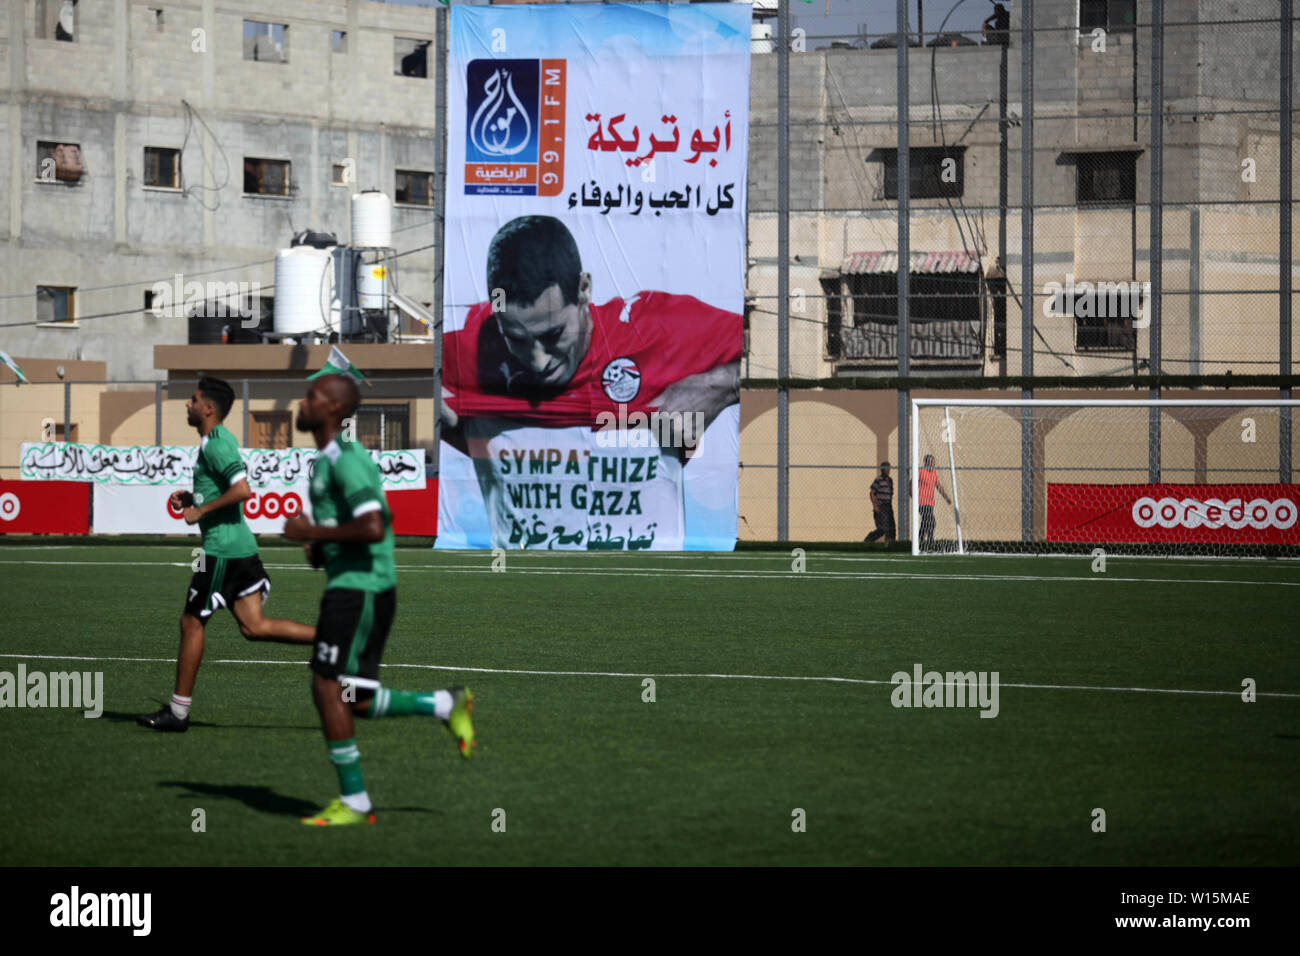 Rafah, Gaza Strip, Palestinian Territory. 30th June, 2019. A poster of Egyptian football player Mohammed Abu Trika is seen during a match between Palestinian players of Khadamat Rafah club (green T-shirt), and players of Balata youth club (yellow T-shirt), in the Palestine cup championship, in Rafah in the southern Gaza Strip on June 30. 2019. The game ended with a 1-1 draw in the first leg of the Palestine Cup final Credit: Mahmoud Ajjour/APA Images/ZUMA Wire/Alamy Live News Stock Photo